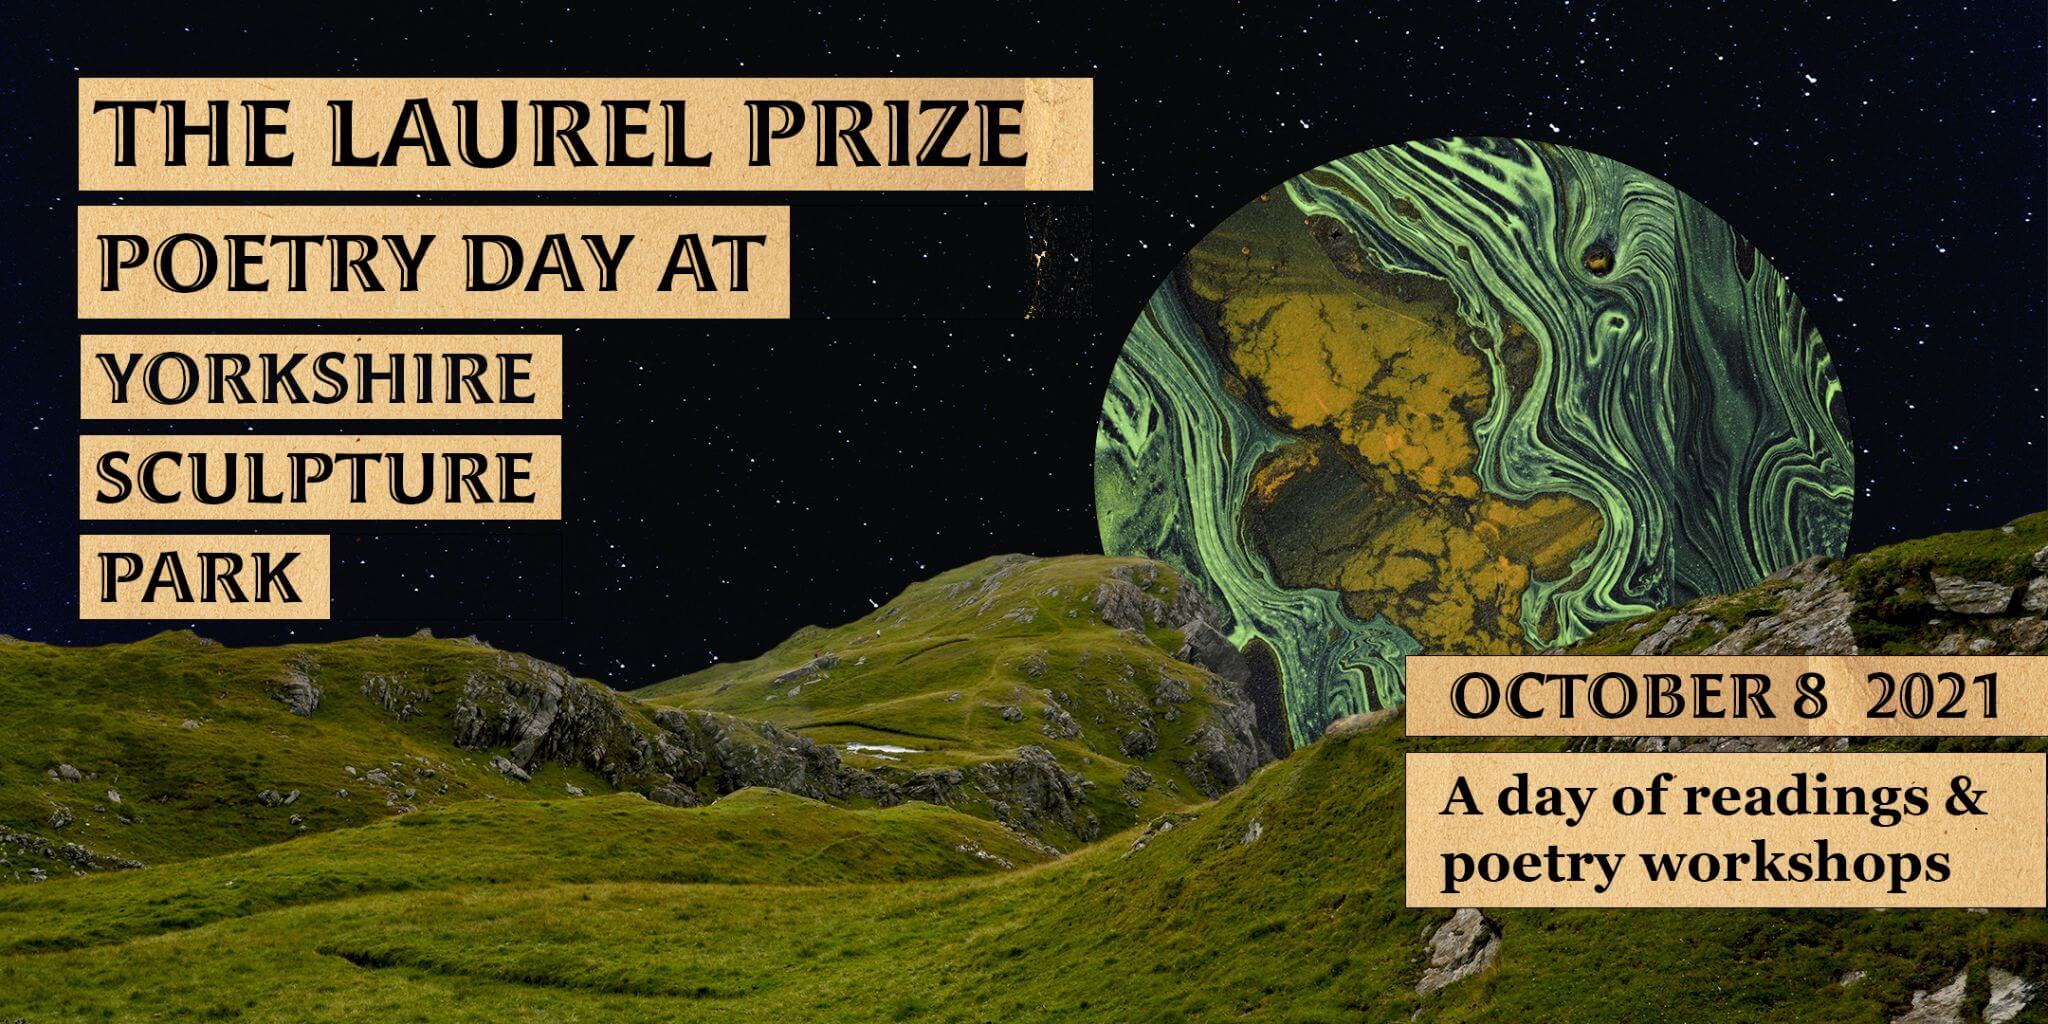 The Laurel Prize Poetry Day